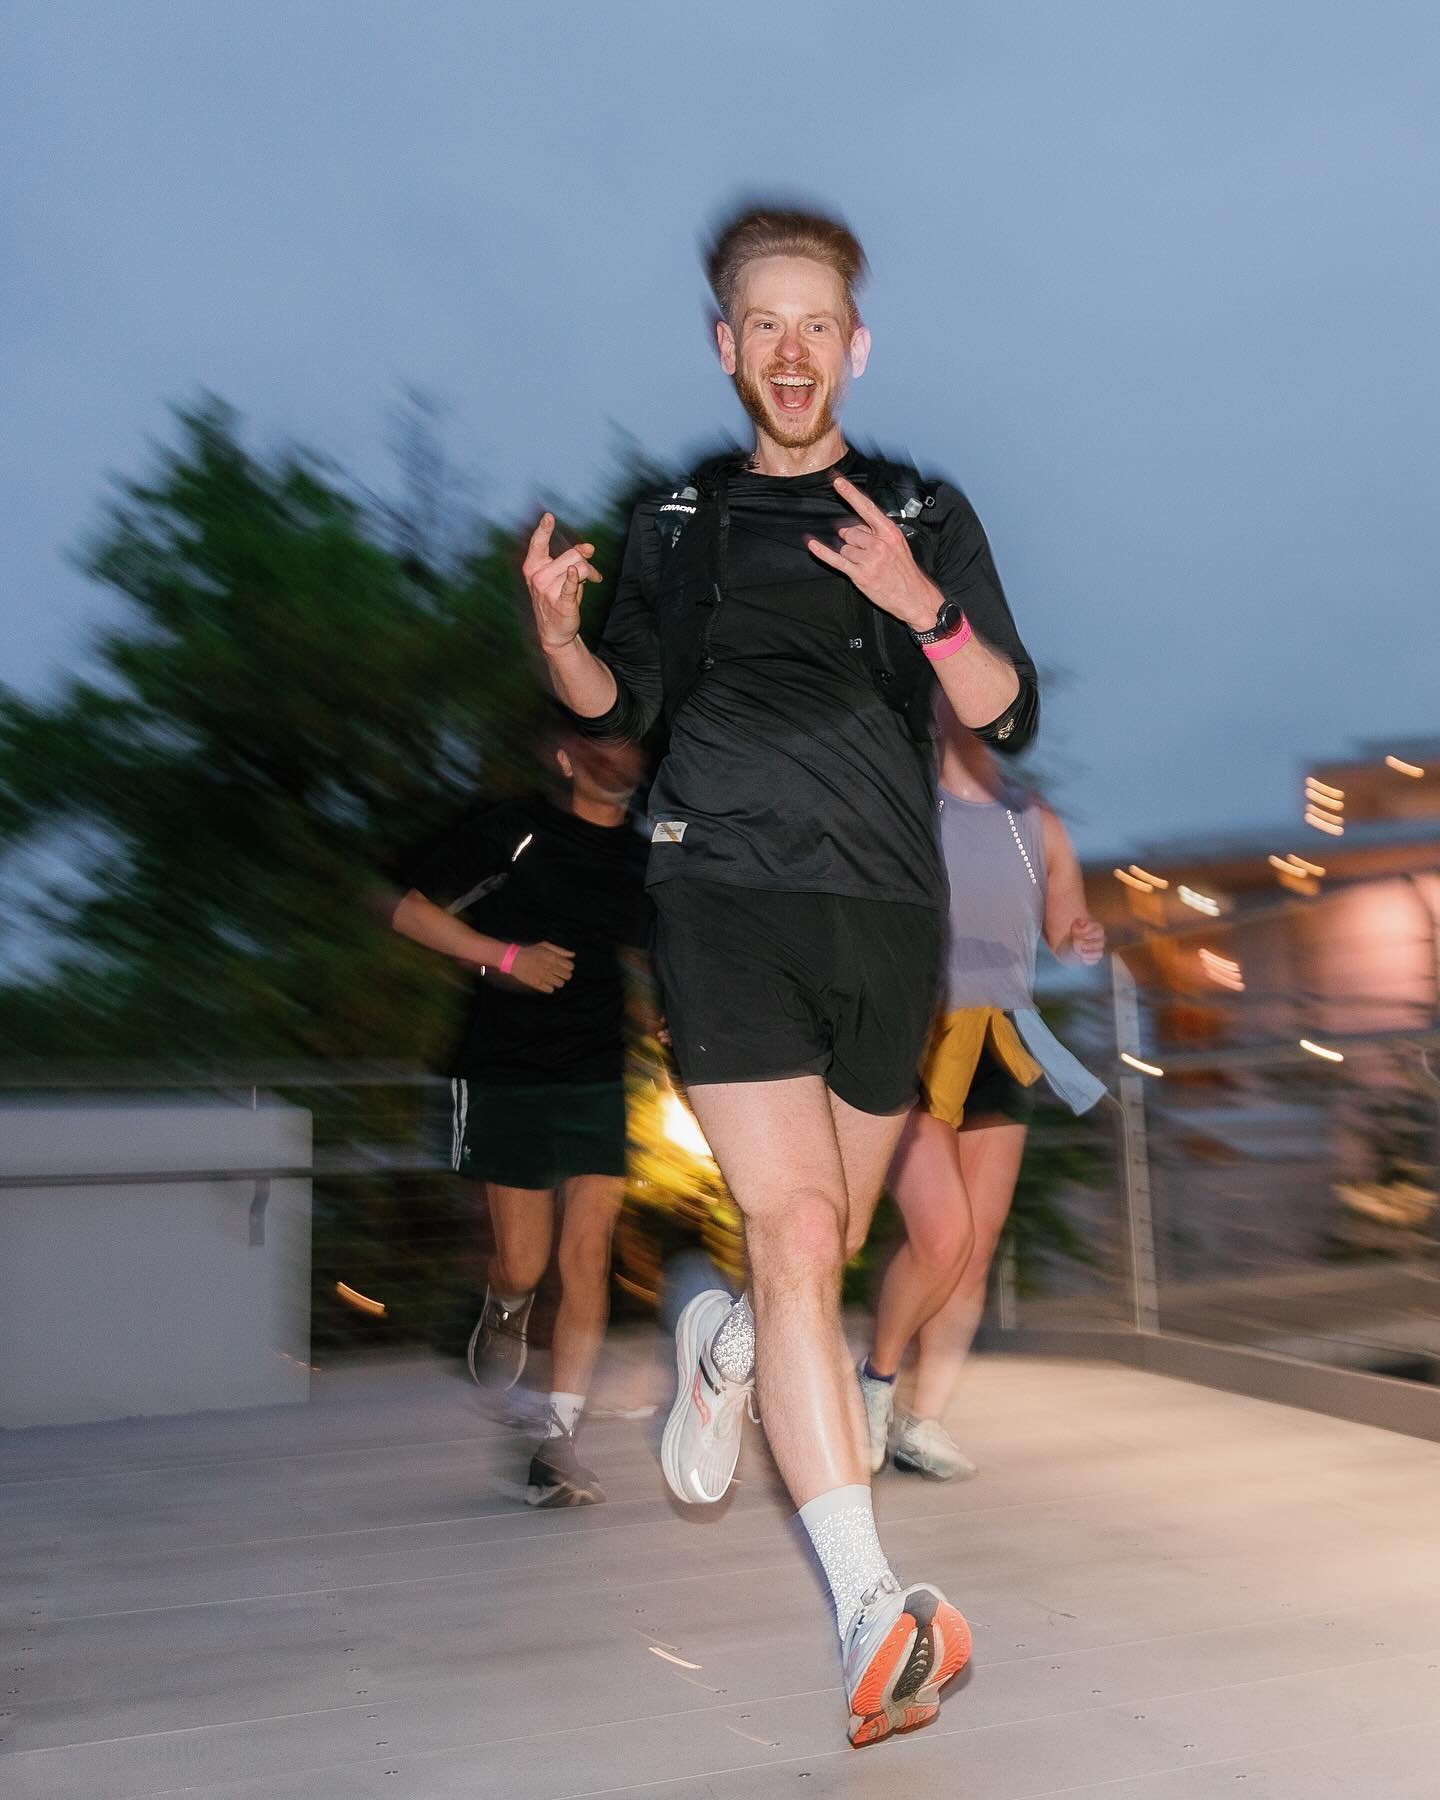 In Friday night seven teams set off on an adventure around the city in a little race we call UNGVRND. The teams were tested both physically and mentally (some more than others). But every team made it to the finish and proved they had what it takes t